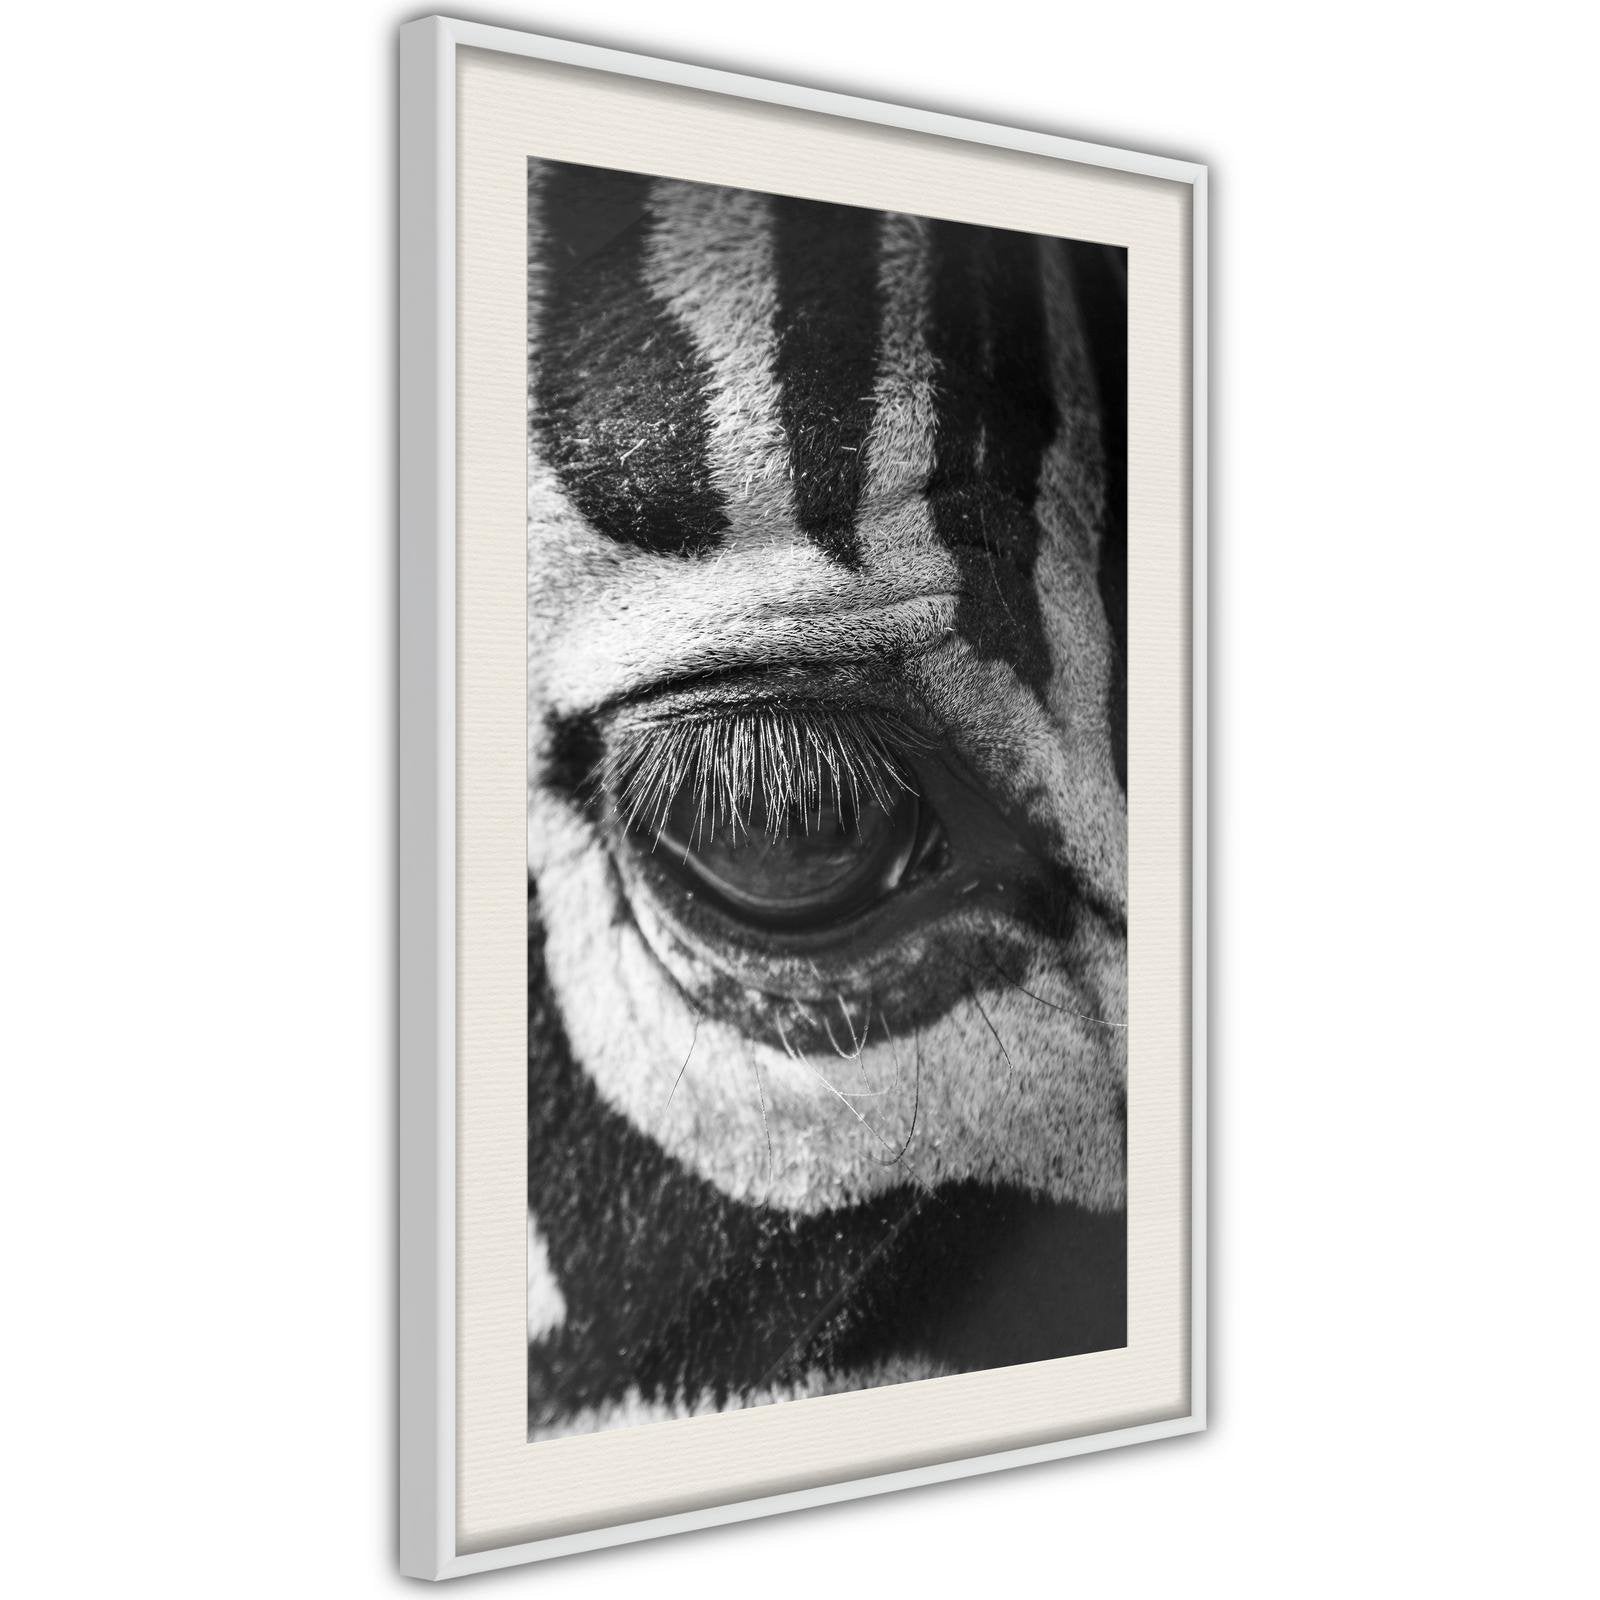 Inramad Poster / Tavla - Zebra Is Watching You-Poster Inramad-Artgeist-peaceofhome.se